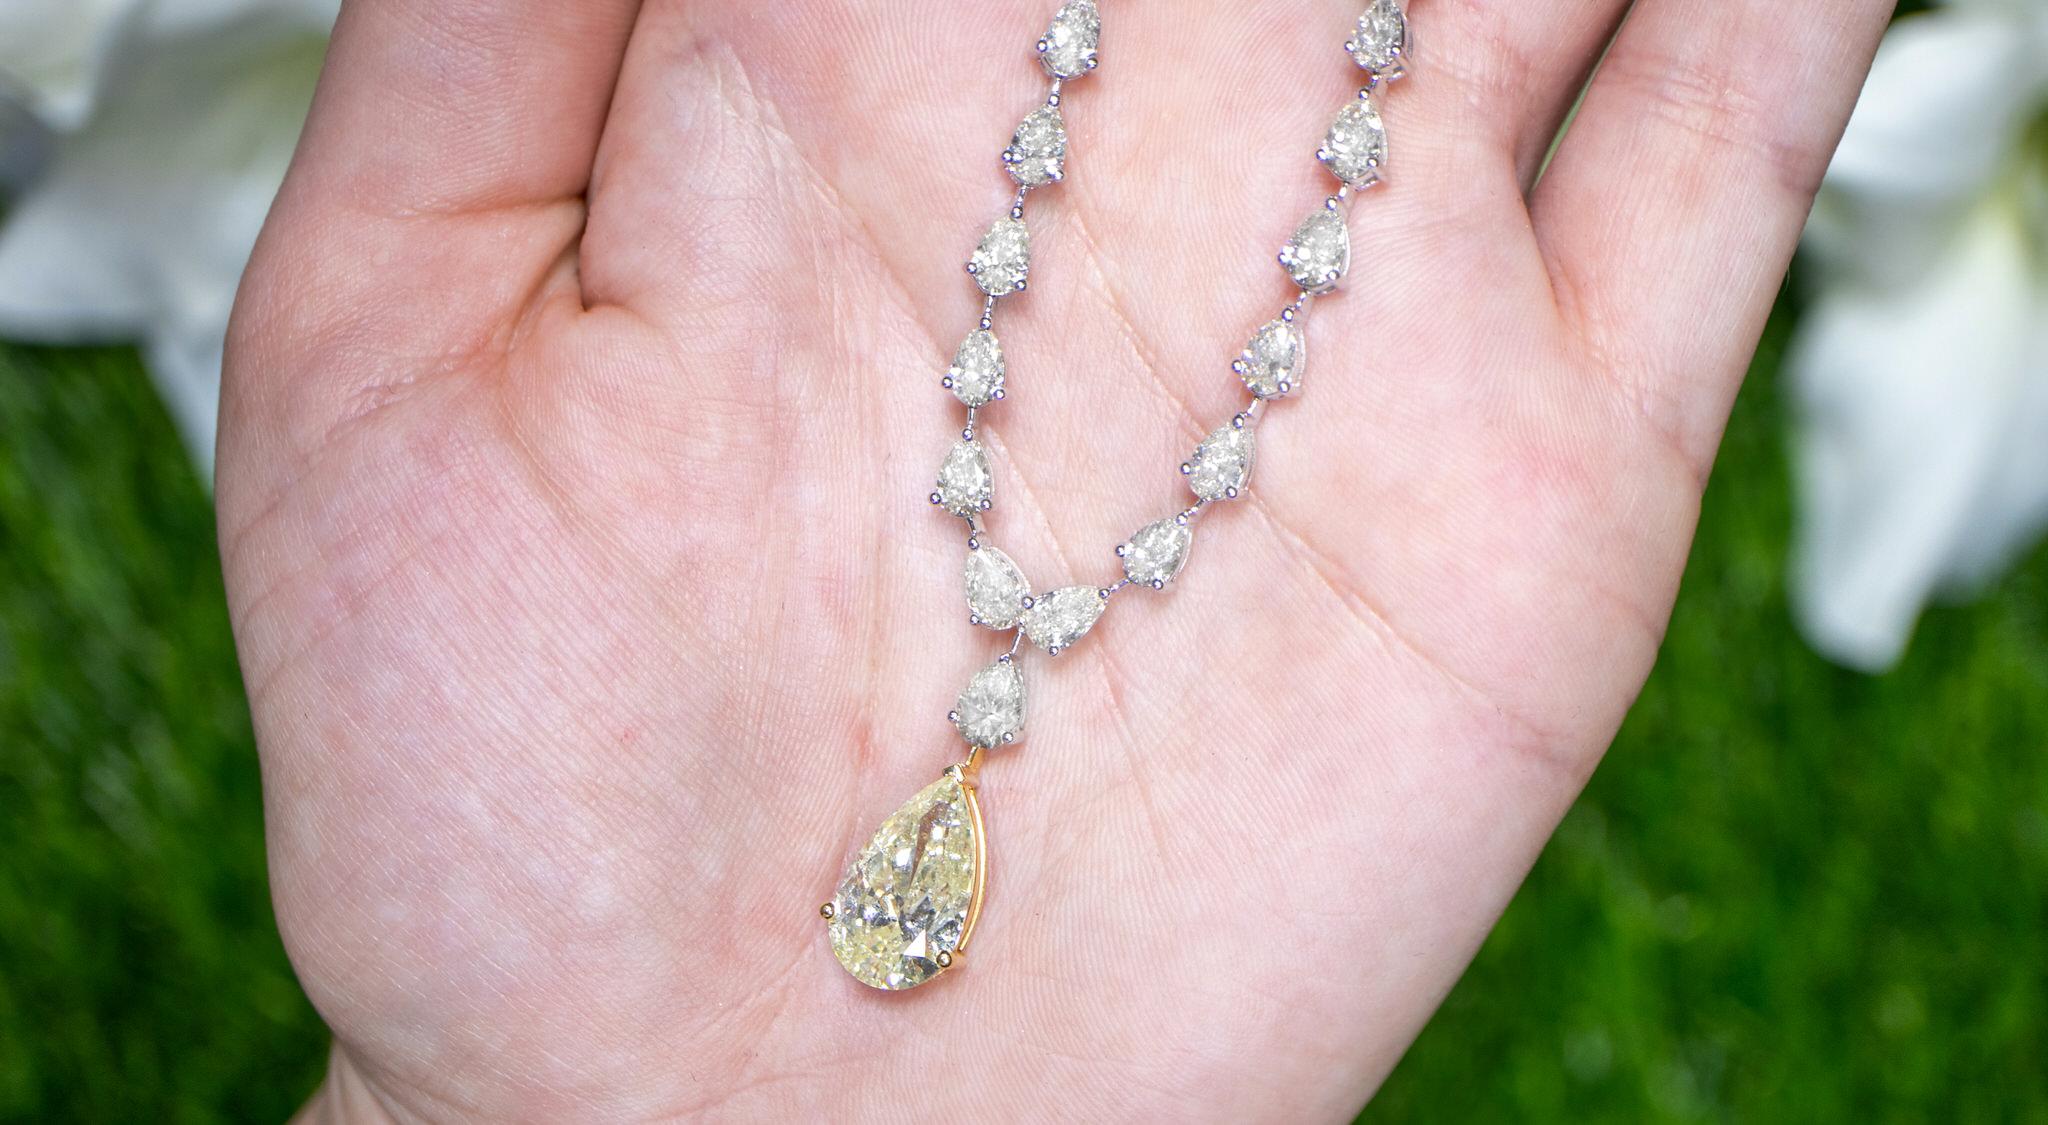 Important Light Yellow Pear Diamond Pendant Necklace 10.6 Carats Total 18K Gold In Excellent Condition For Sale In Laguna Niguel, CA